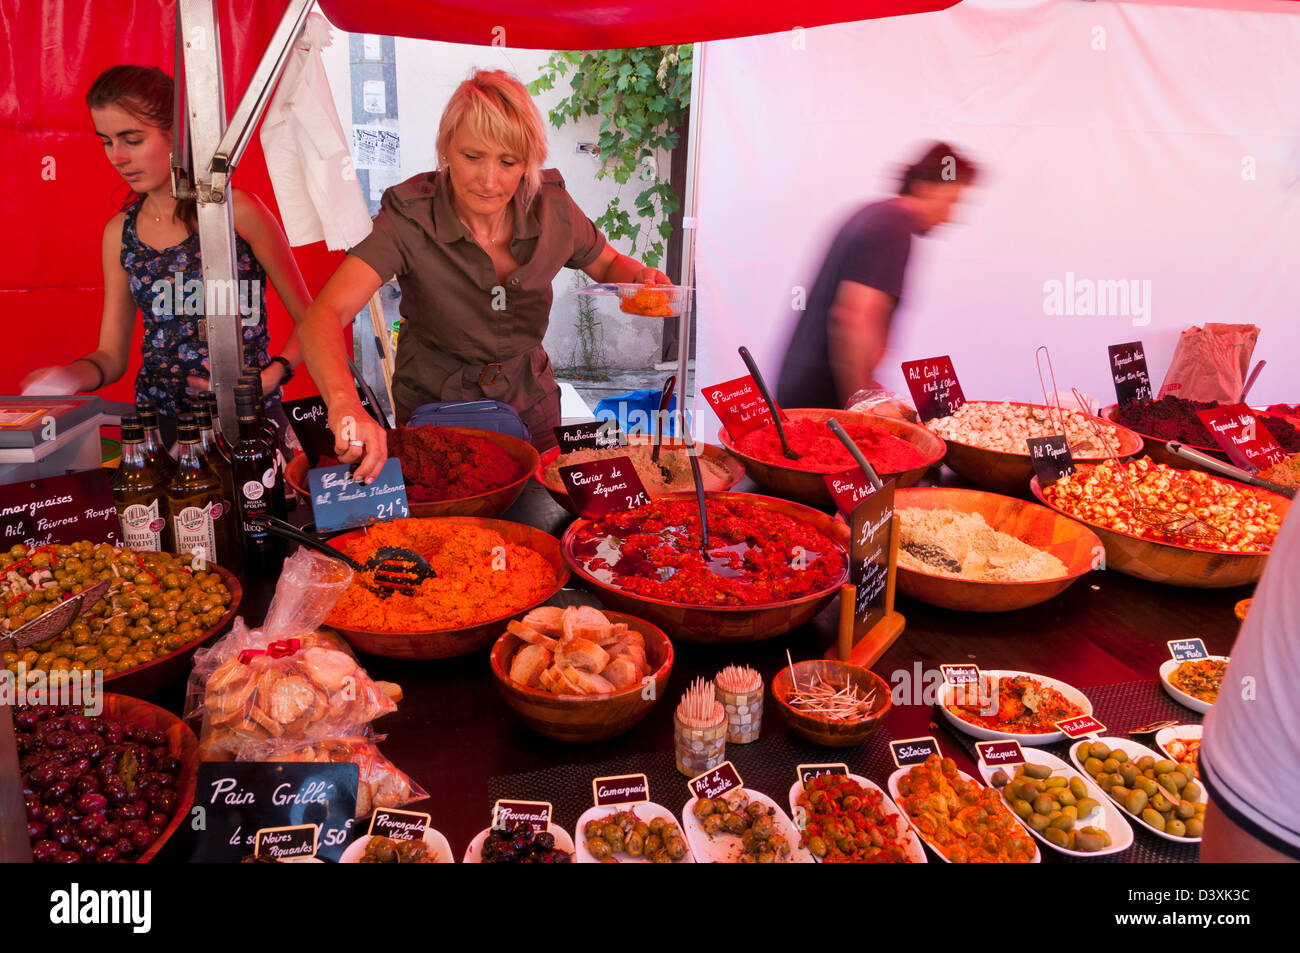 Saturday Market in Gignac, Hérault, Languedoc Roussillon, France Stock Photo